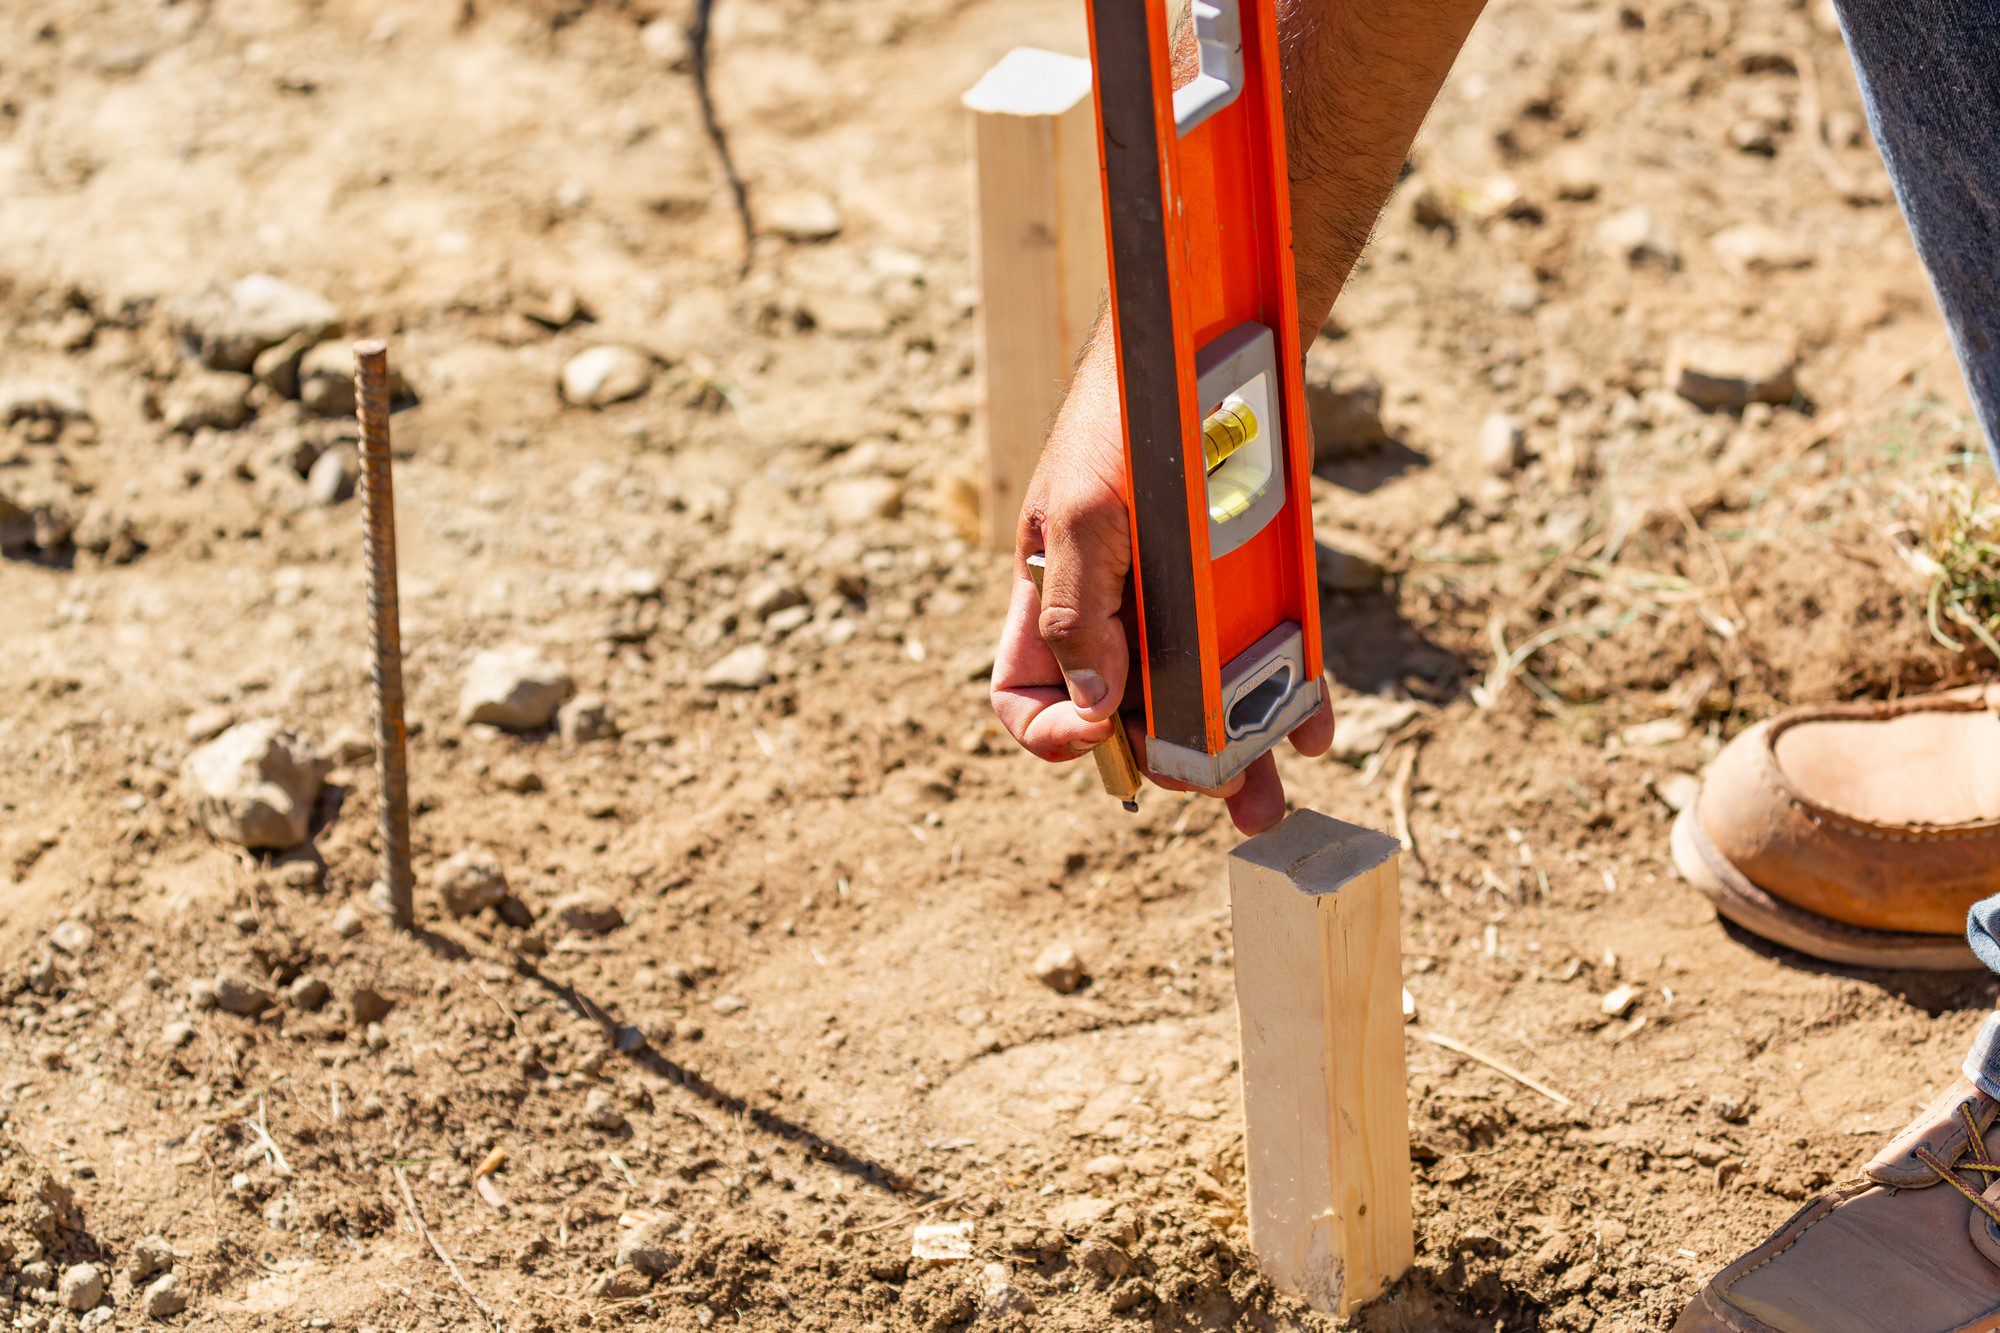 This image features a person using a red spirit level to cheque the verticality of a wooden stake that has been placed in the ground. Part of the individual's body is visible, specifically their hands holding the level and their lower legs; they are wearing jeans and brown boots. On the ground next to them is a rusty rebar or stake and a brown object that appears to be a bowl or hard hat. The ground itself looks dry and uneven with some rocks and sparse vegetation, suggesting an outdoor construction site or a similar work setting.